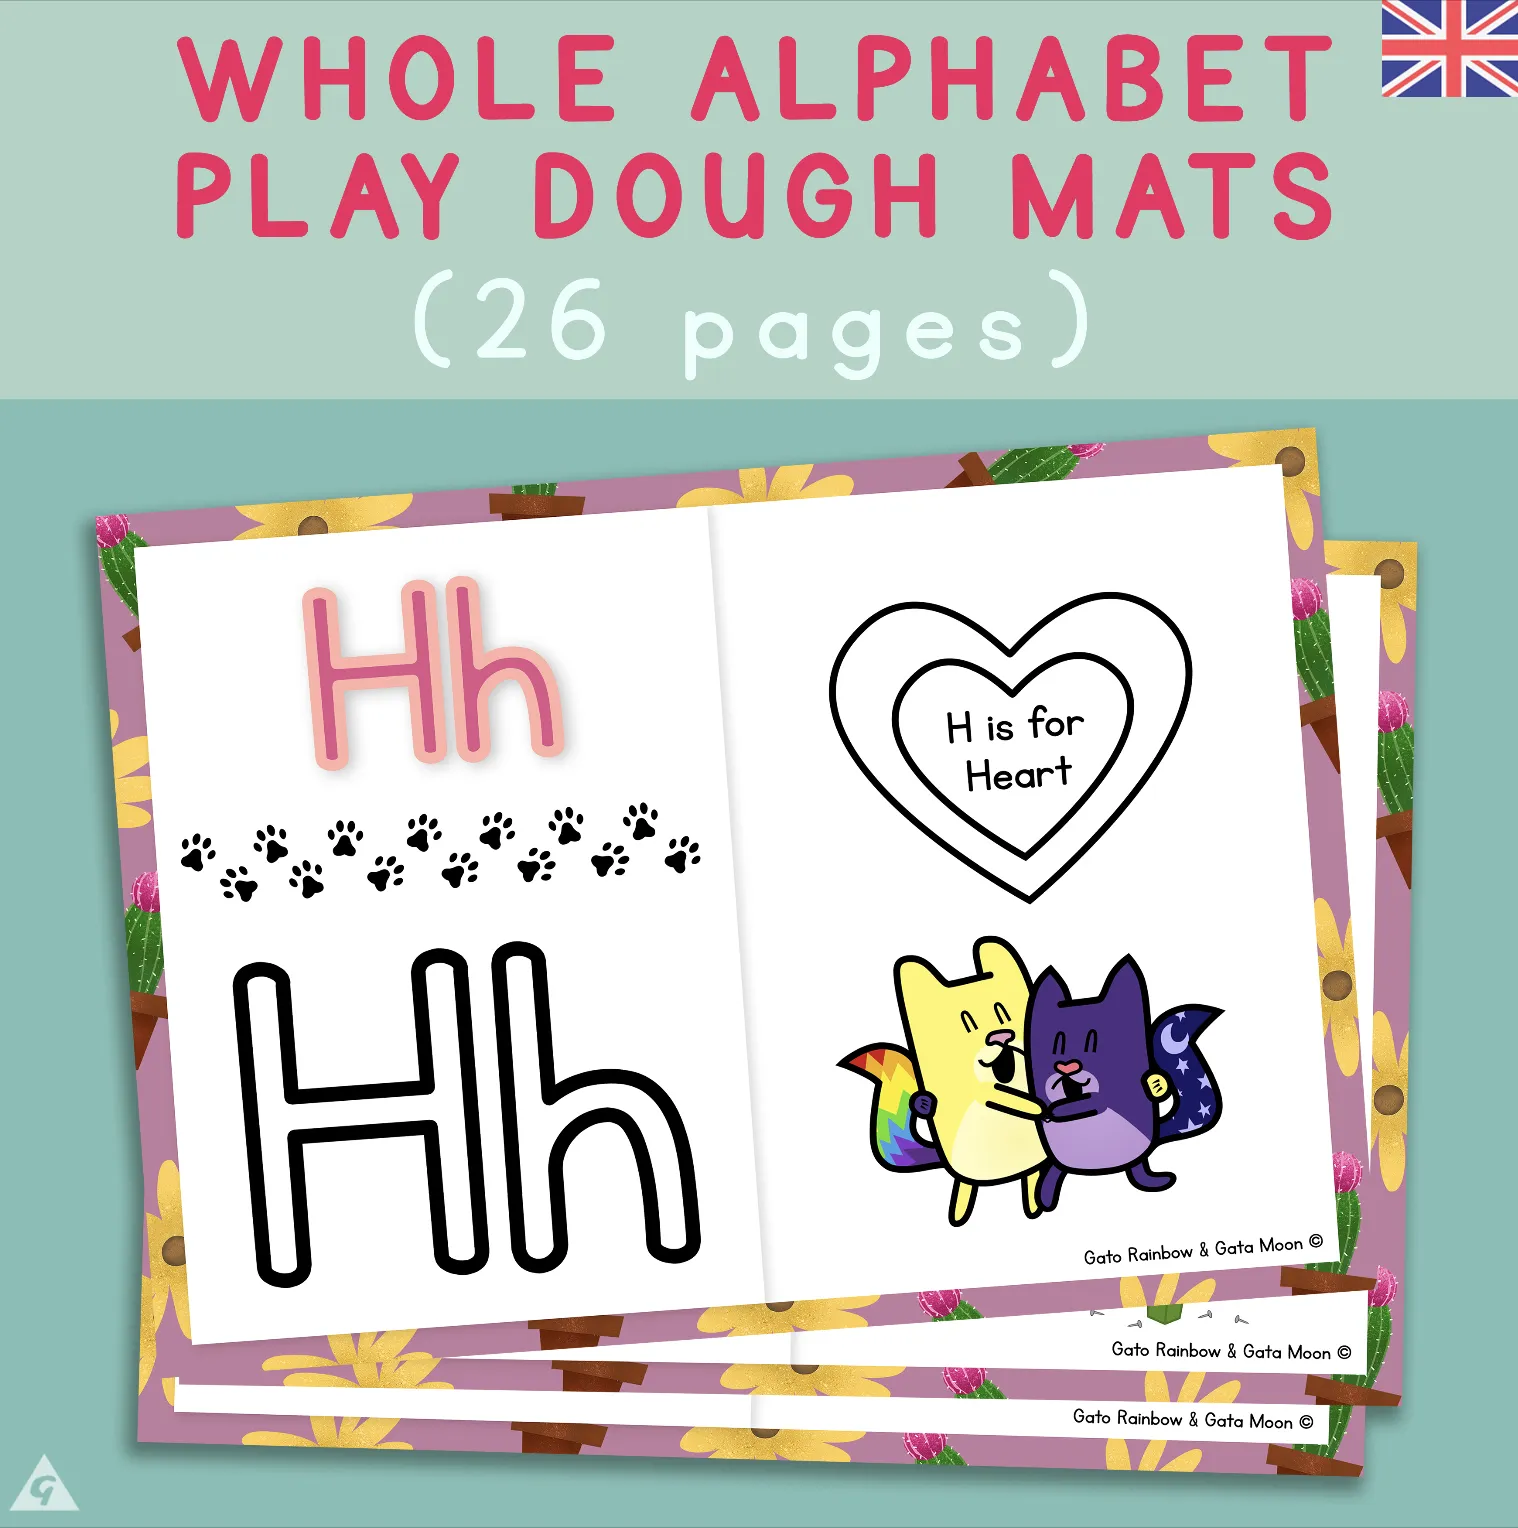 ALPHABET Play Dough Mats  - Create letters and drawings with playdough - English